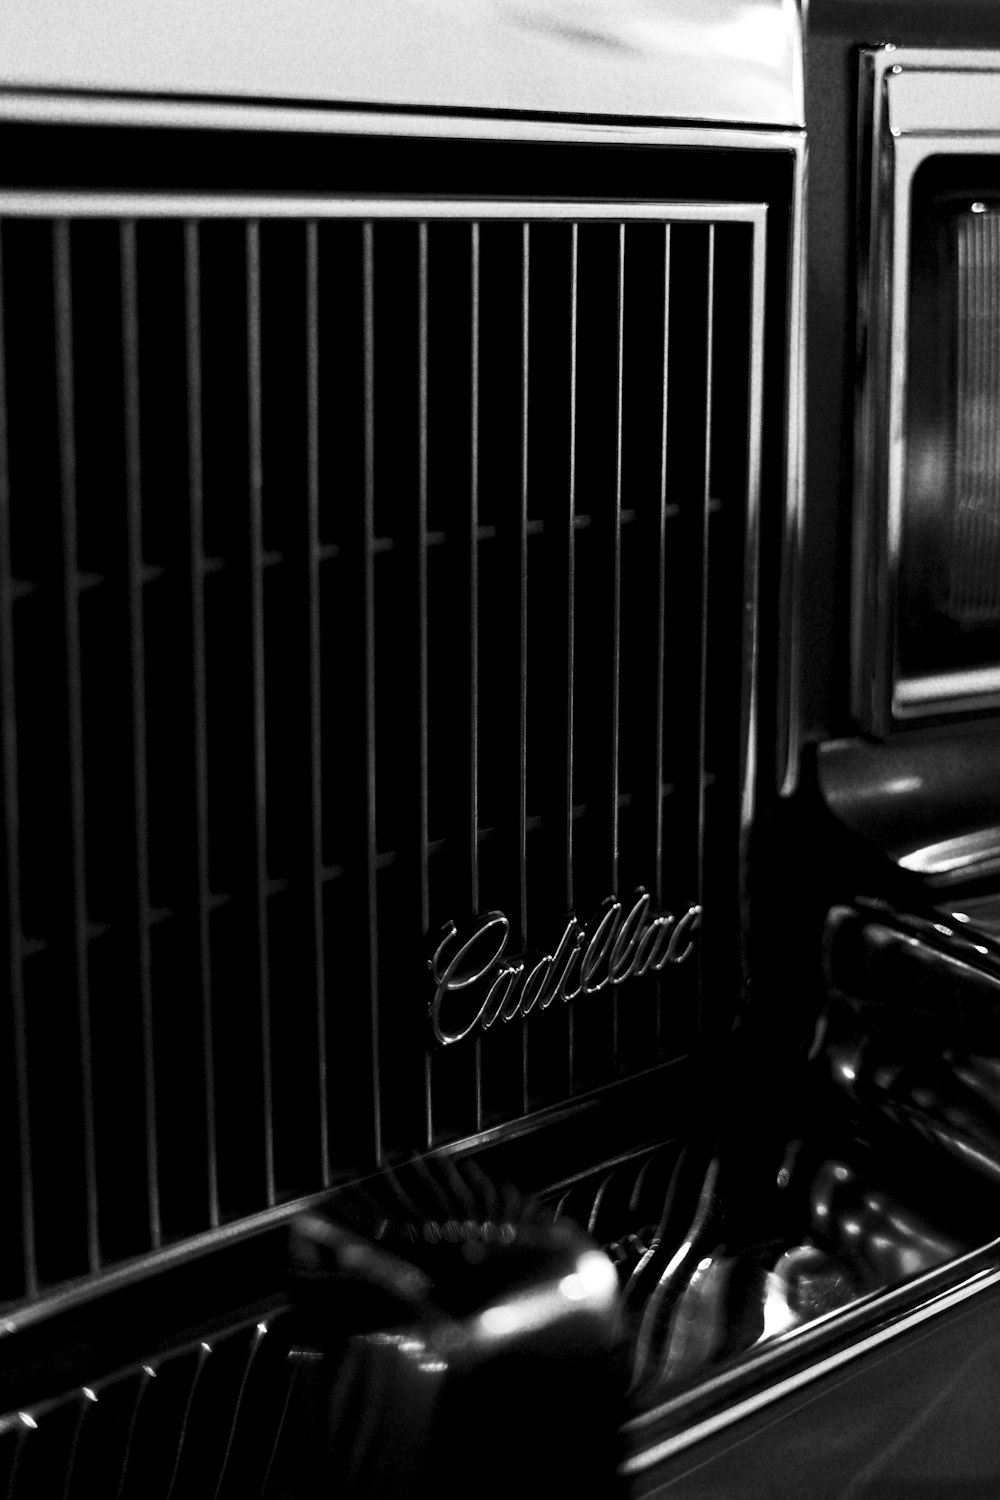 a close-up of a black grill